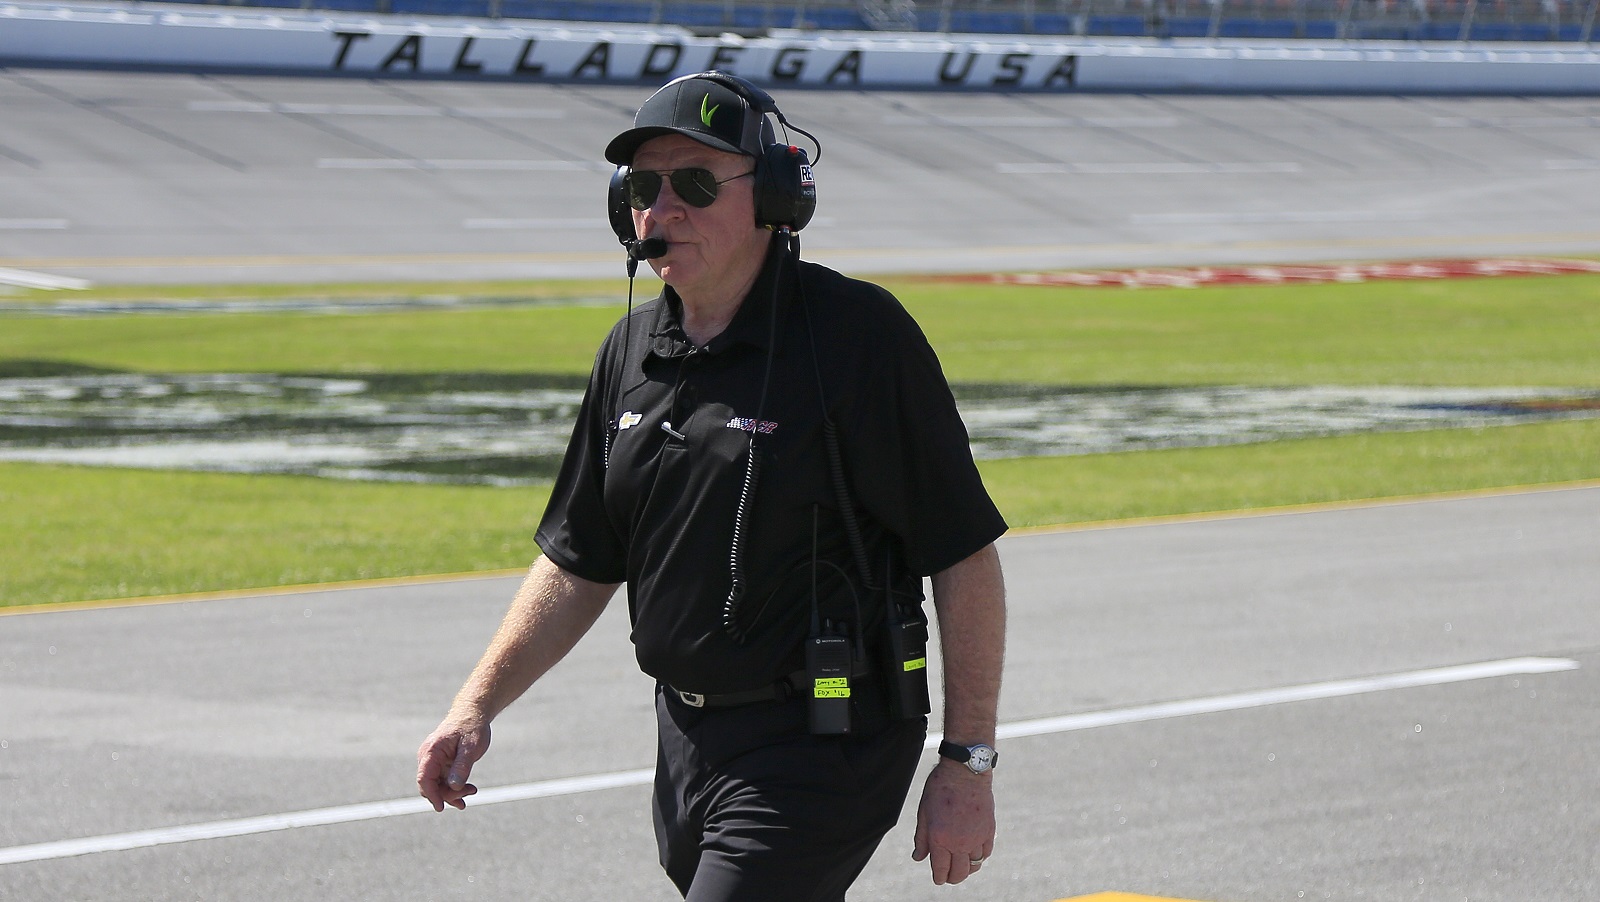 Crew chief of the No, 3 Chevy Larry McReynolds makes his way to his pit box before the Ag-Pro 300 NASCAR Xfinity Series race on April 23, 2022, at Talladega Superspeedway. | David J. Griffin/Icon Sportswire via Getty Images